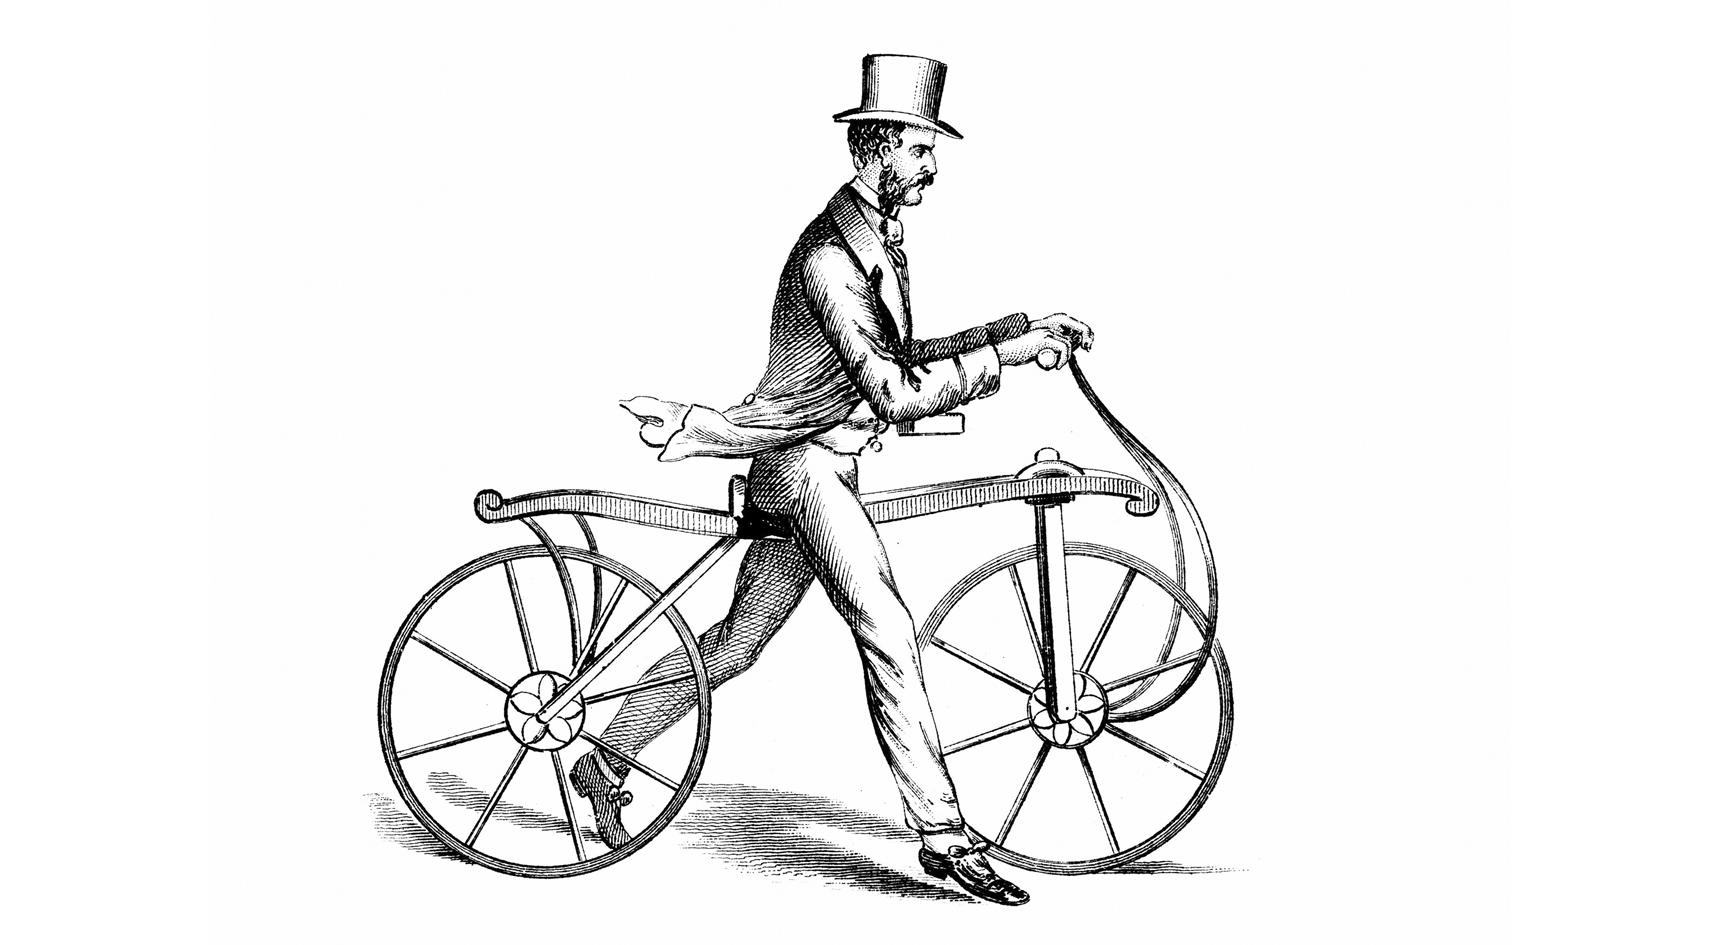 A drawing of a person riding the dandy horse.